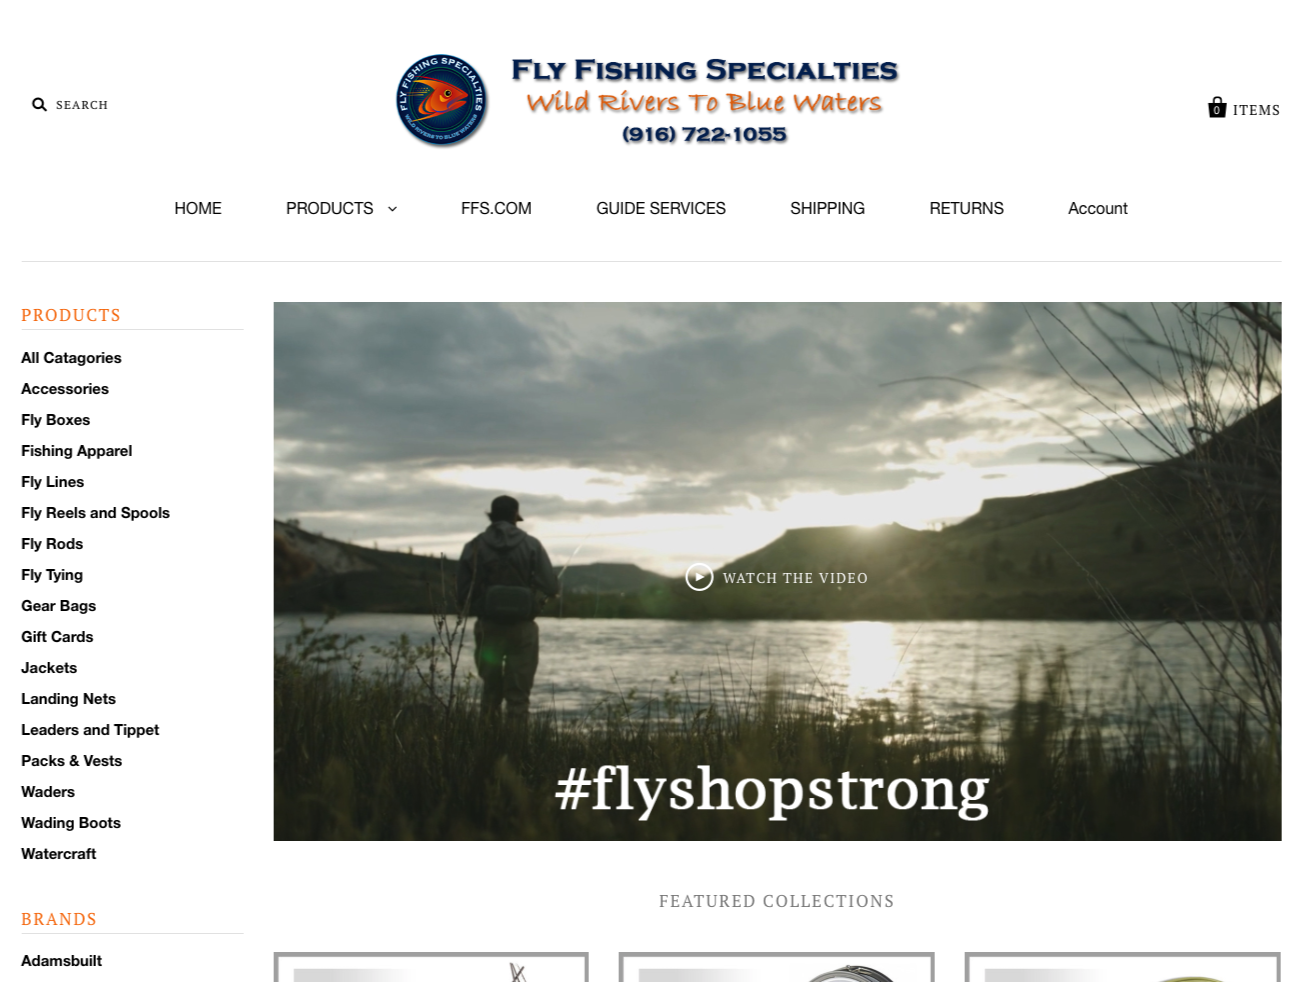 ABOUT US - SPECIALIZED FLY FISHING GEAR, NORTHERN CALIFORNIA GUIDE  SERVICES, CLASSES, AND TRAVEL